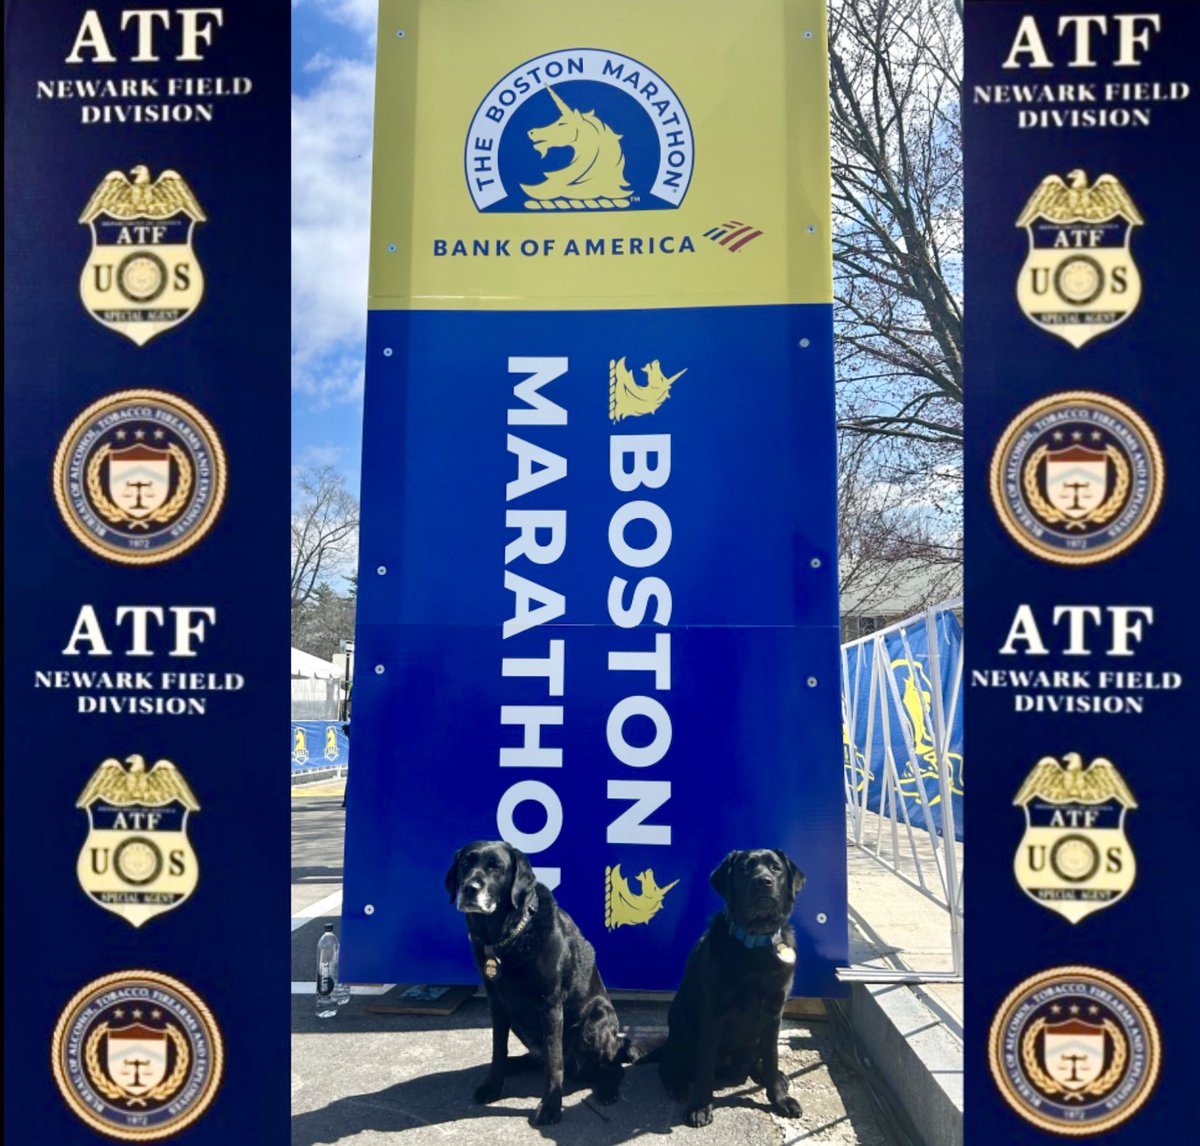 ATF Newark K9 Sunny and ATF NY K9 Jet joined other ATF, state, local, and federal explosive detection K9 teams in performing protective sweeps at the Boston Marathon. Proud of all today’s runners, supporters, event staff, and being able to assist in a fun & safe #BostonMarathon